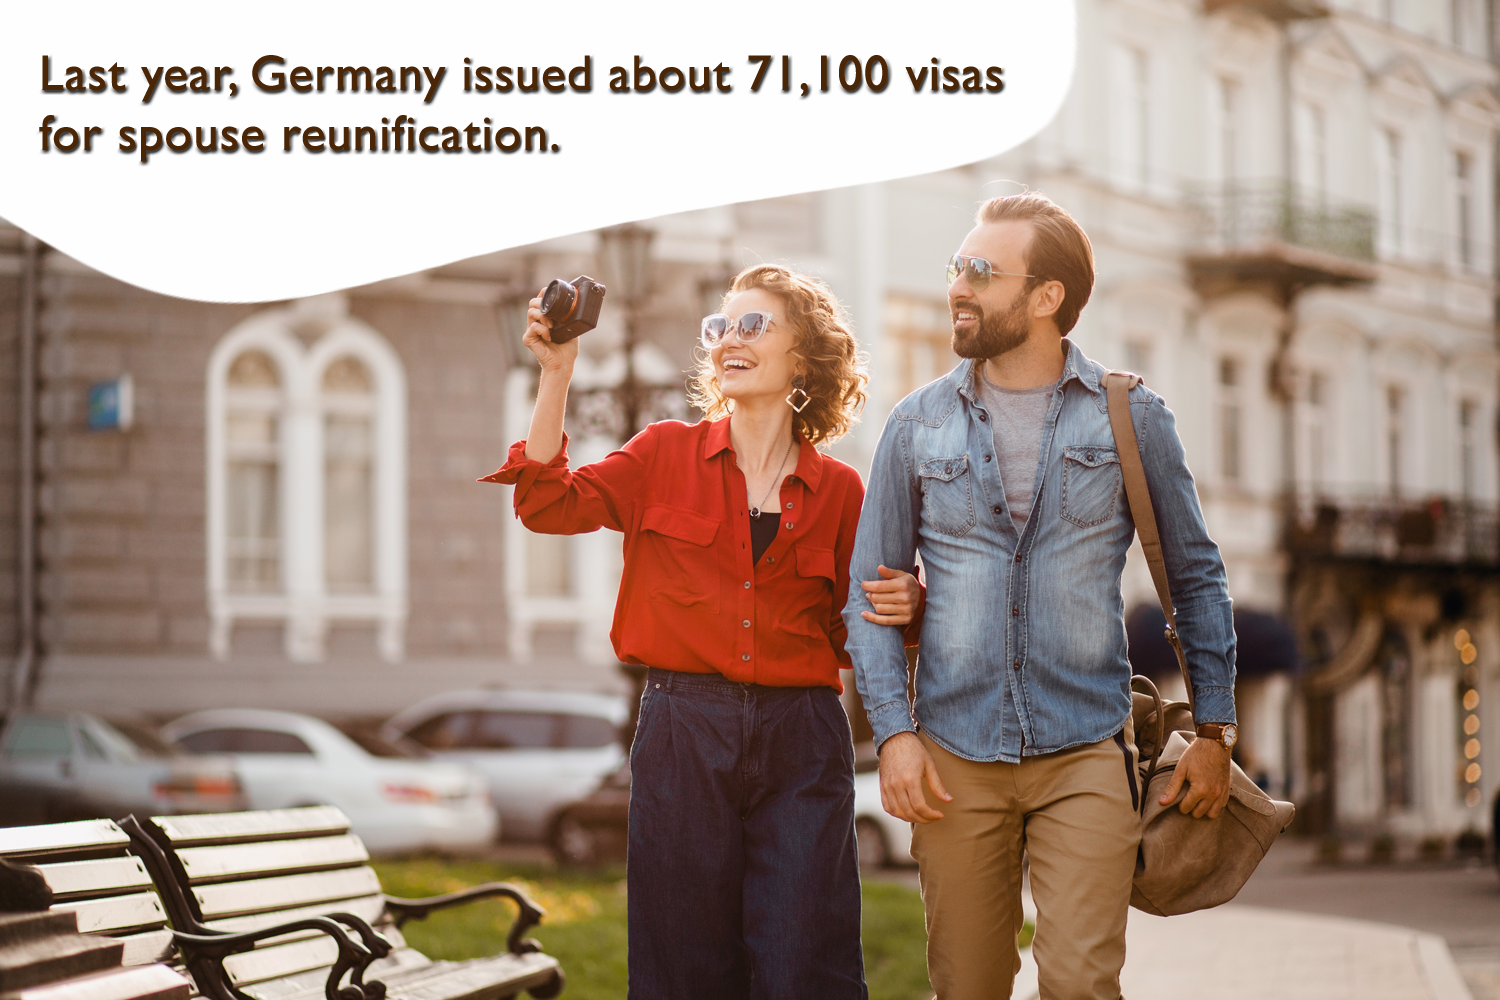 Last year, Germany issued about 71,100 visas for spouse reunification.